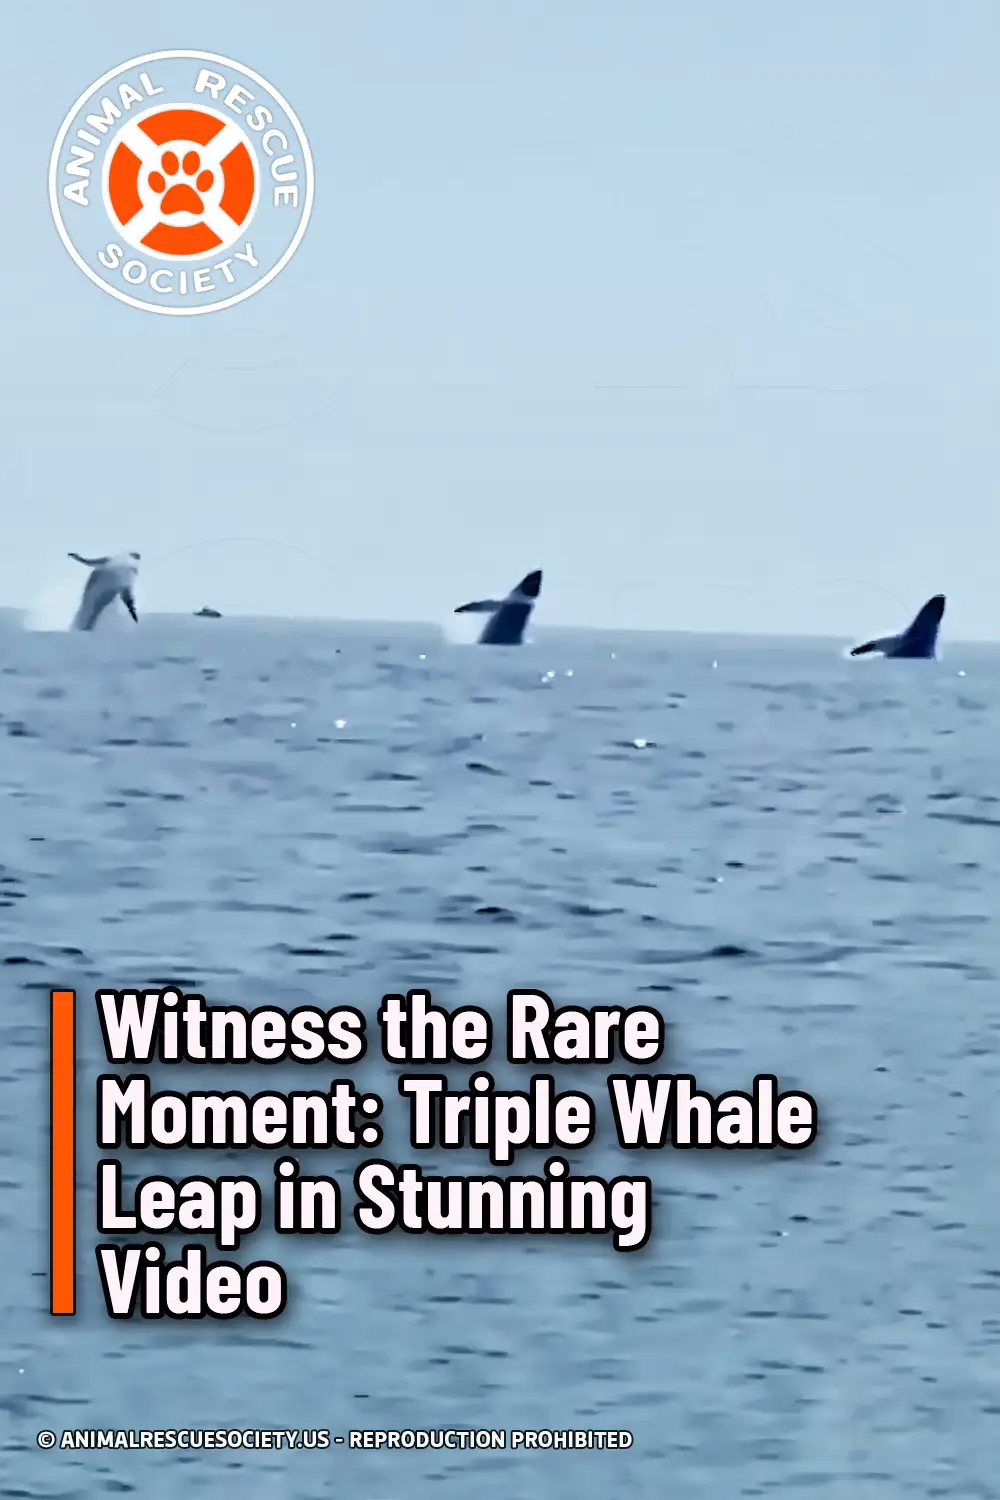 Witness the Rare Moment: Triple Whale Leap in Stunning Video